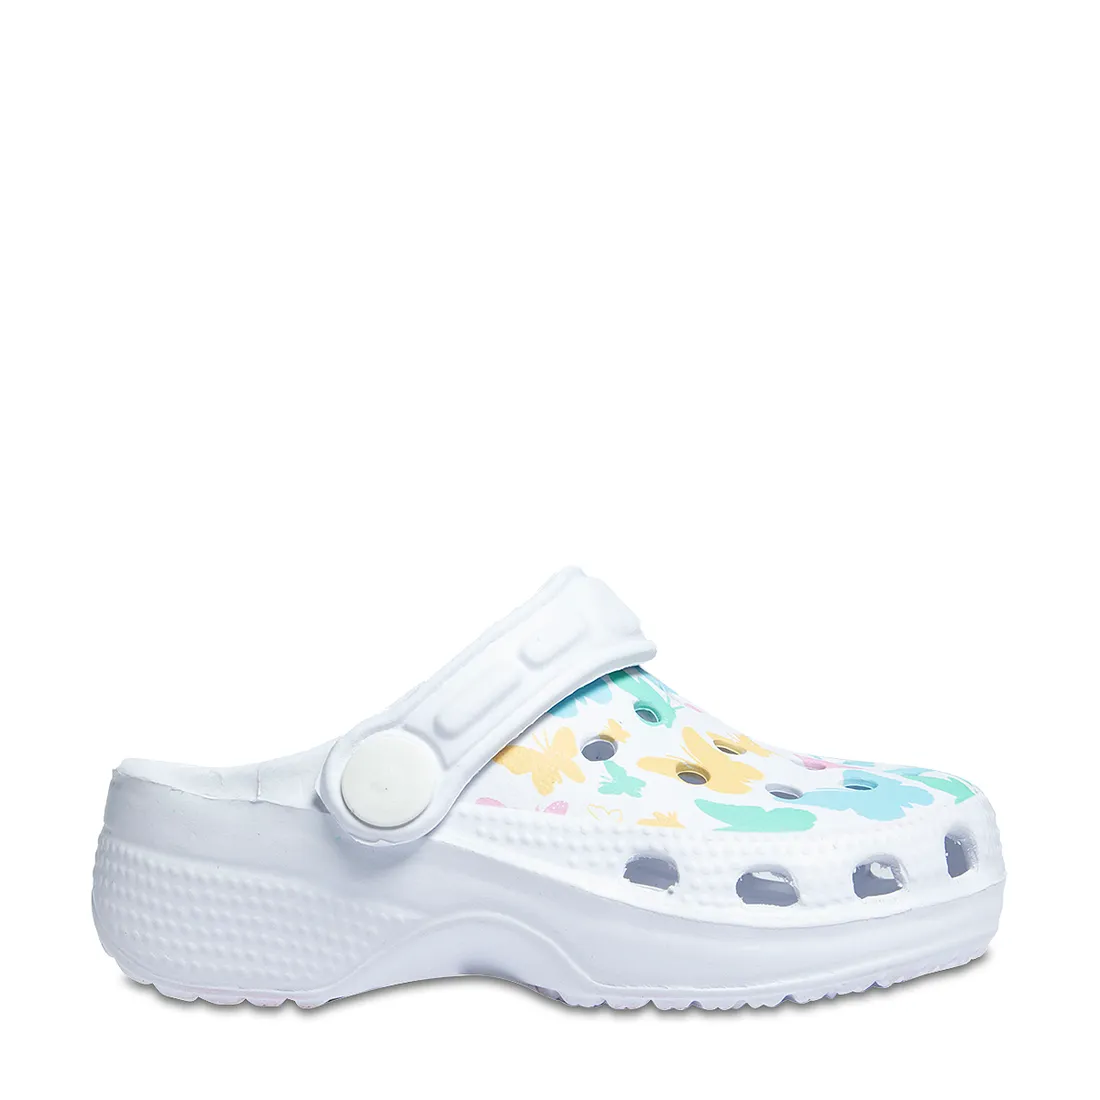 Butterfly clog white - GIRLS 2-8 YEARS Shoes | Ackermans